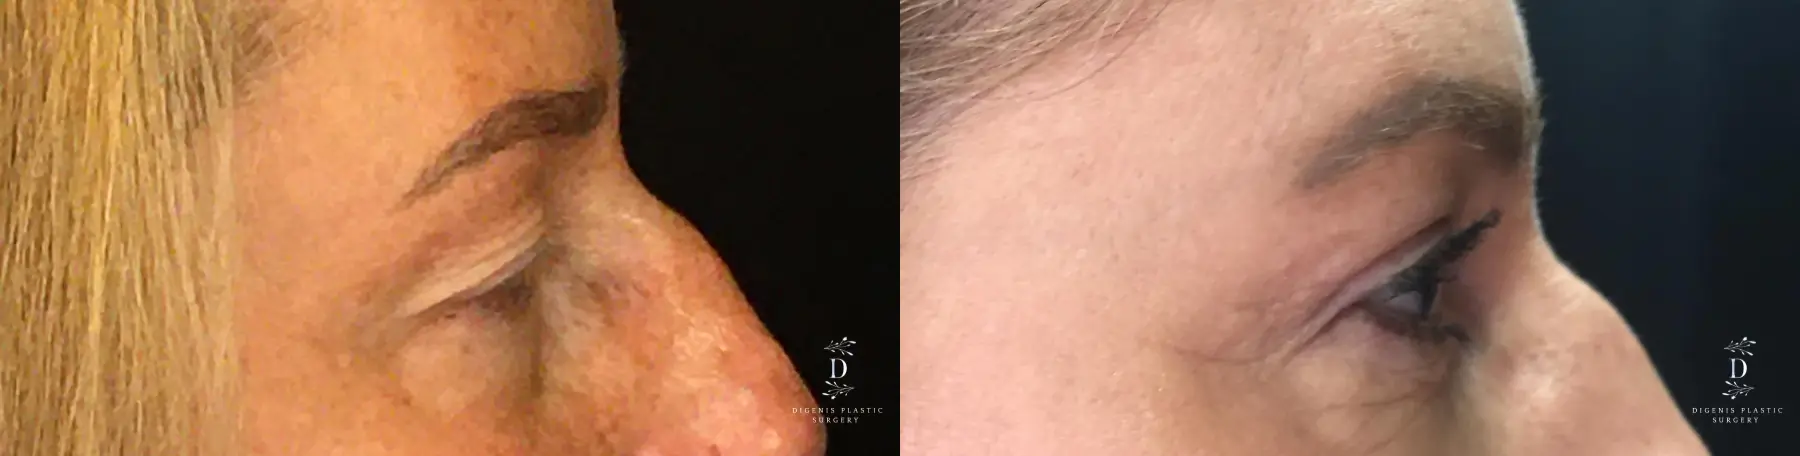 Eyelid Surgery: Patient 13 - Before and After 3